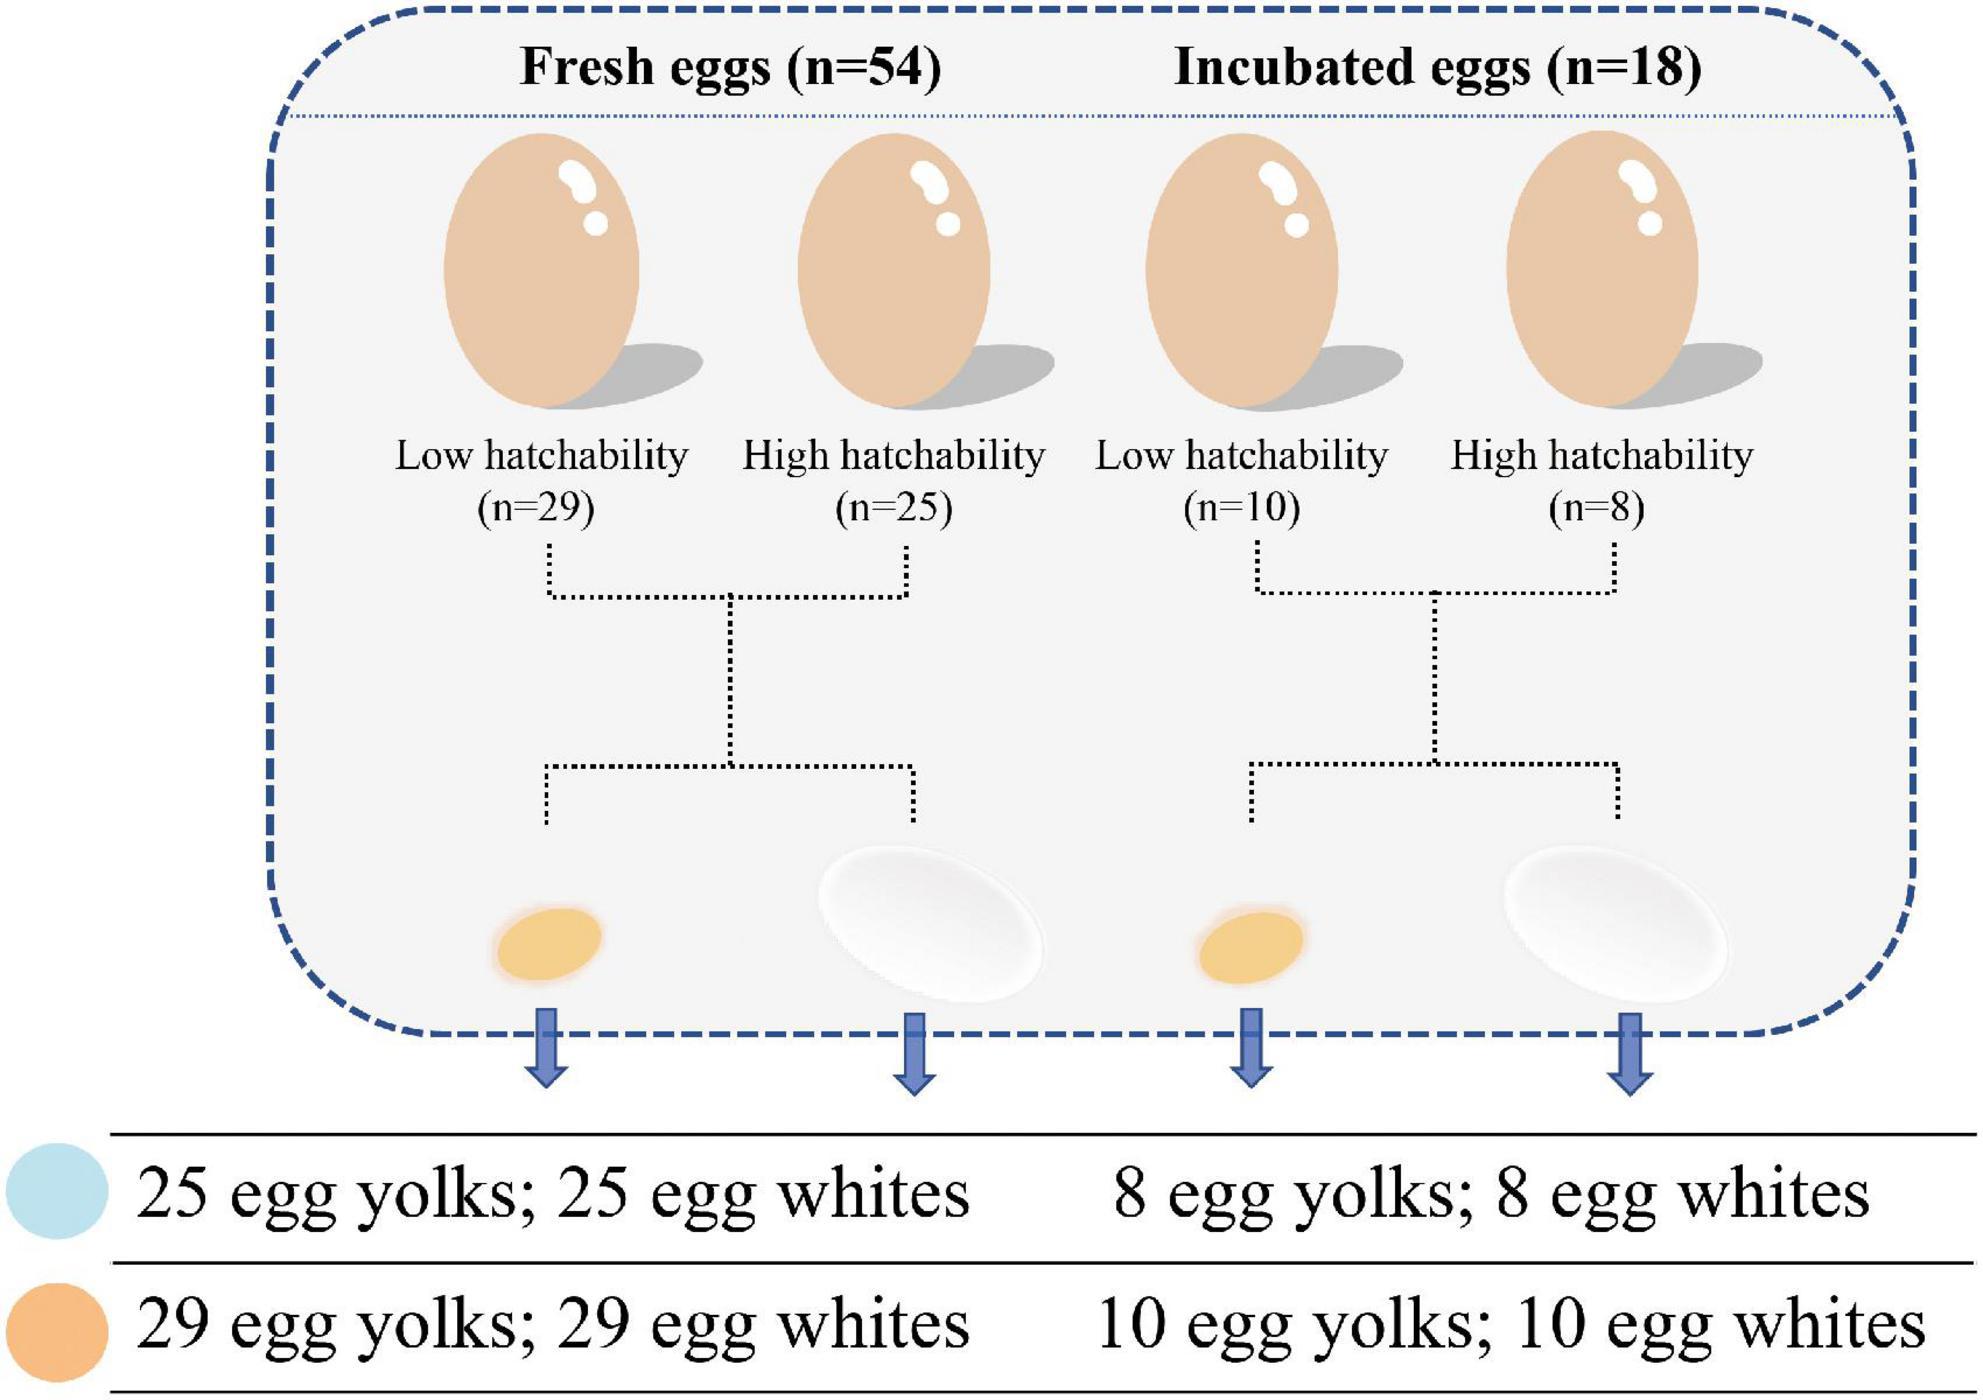 Key Temperatures for Egg Safety in Food Service Operations and